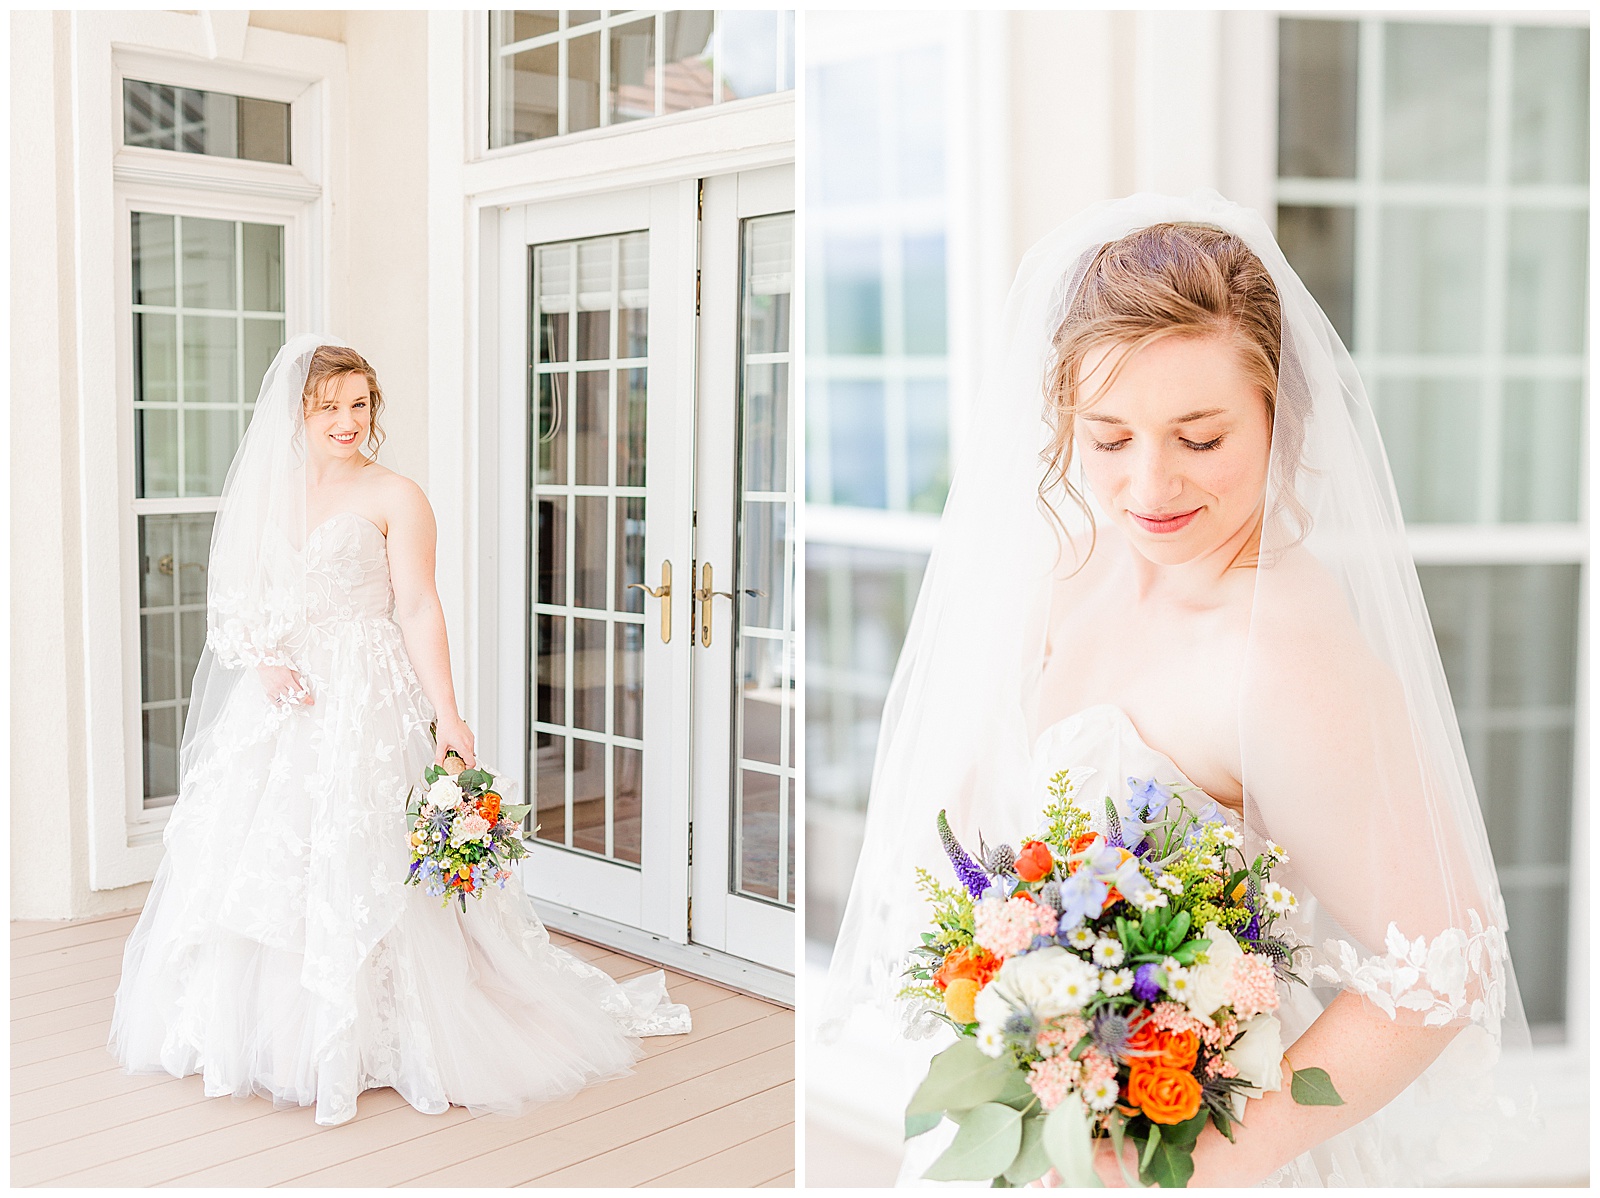 lakehouse white mansion location 👰 Bride: lace wedding dress + veil 💐 Colorful orange and blue bouquet 📸 Outdoorsy Lake and Mountain Bridal Session with Julia | Kevyn Dixon Photography